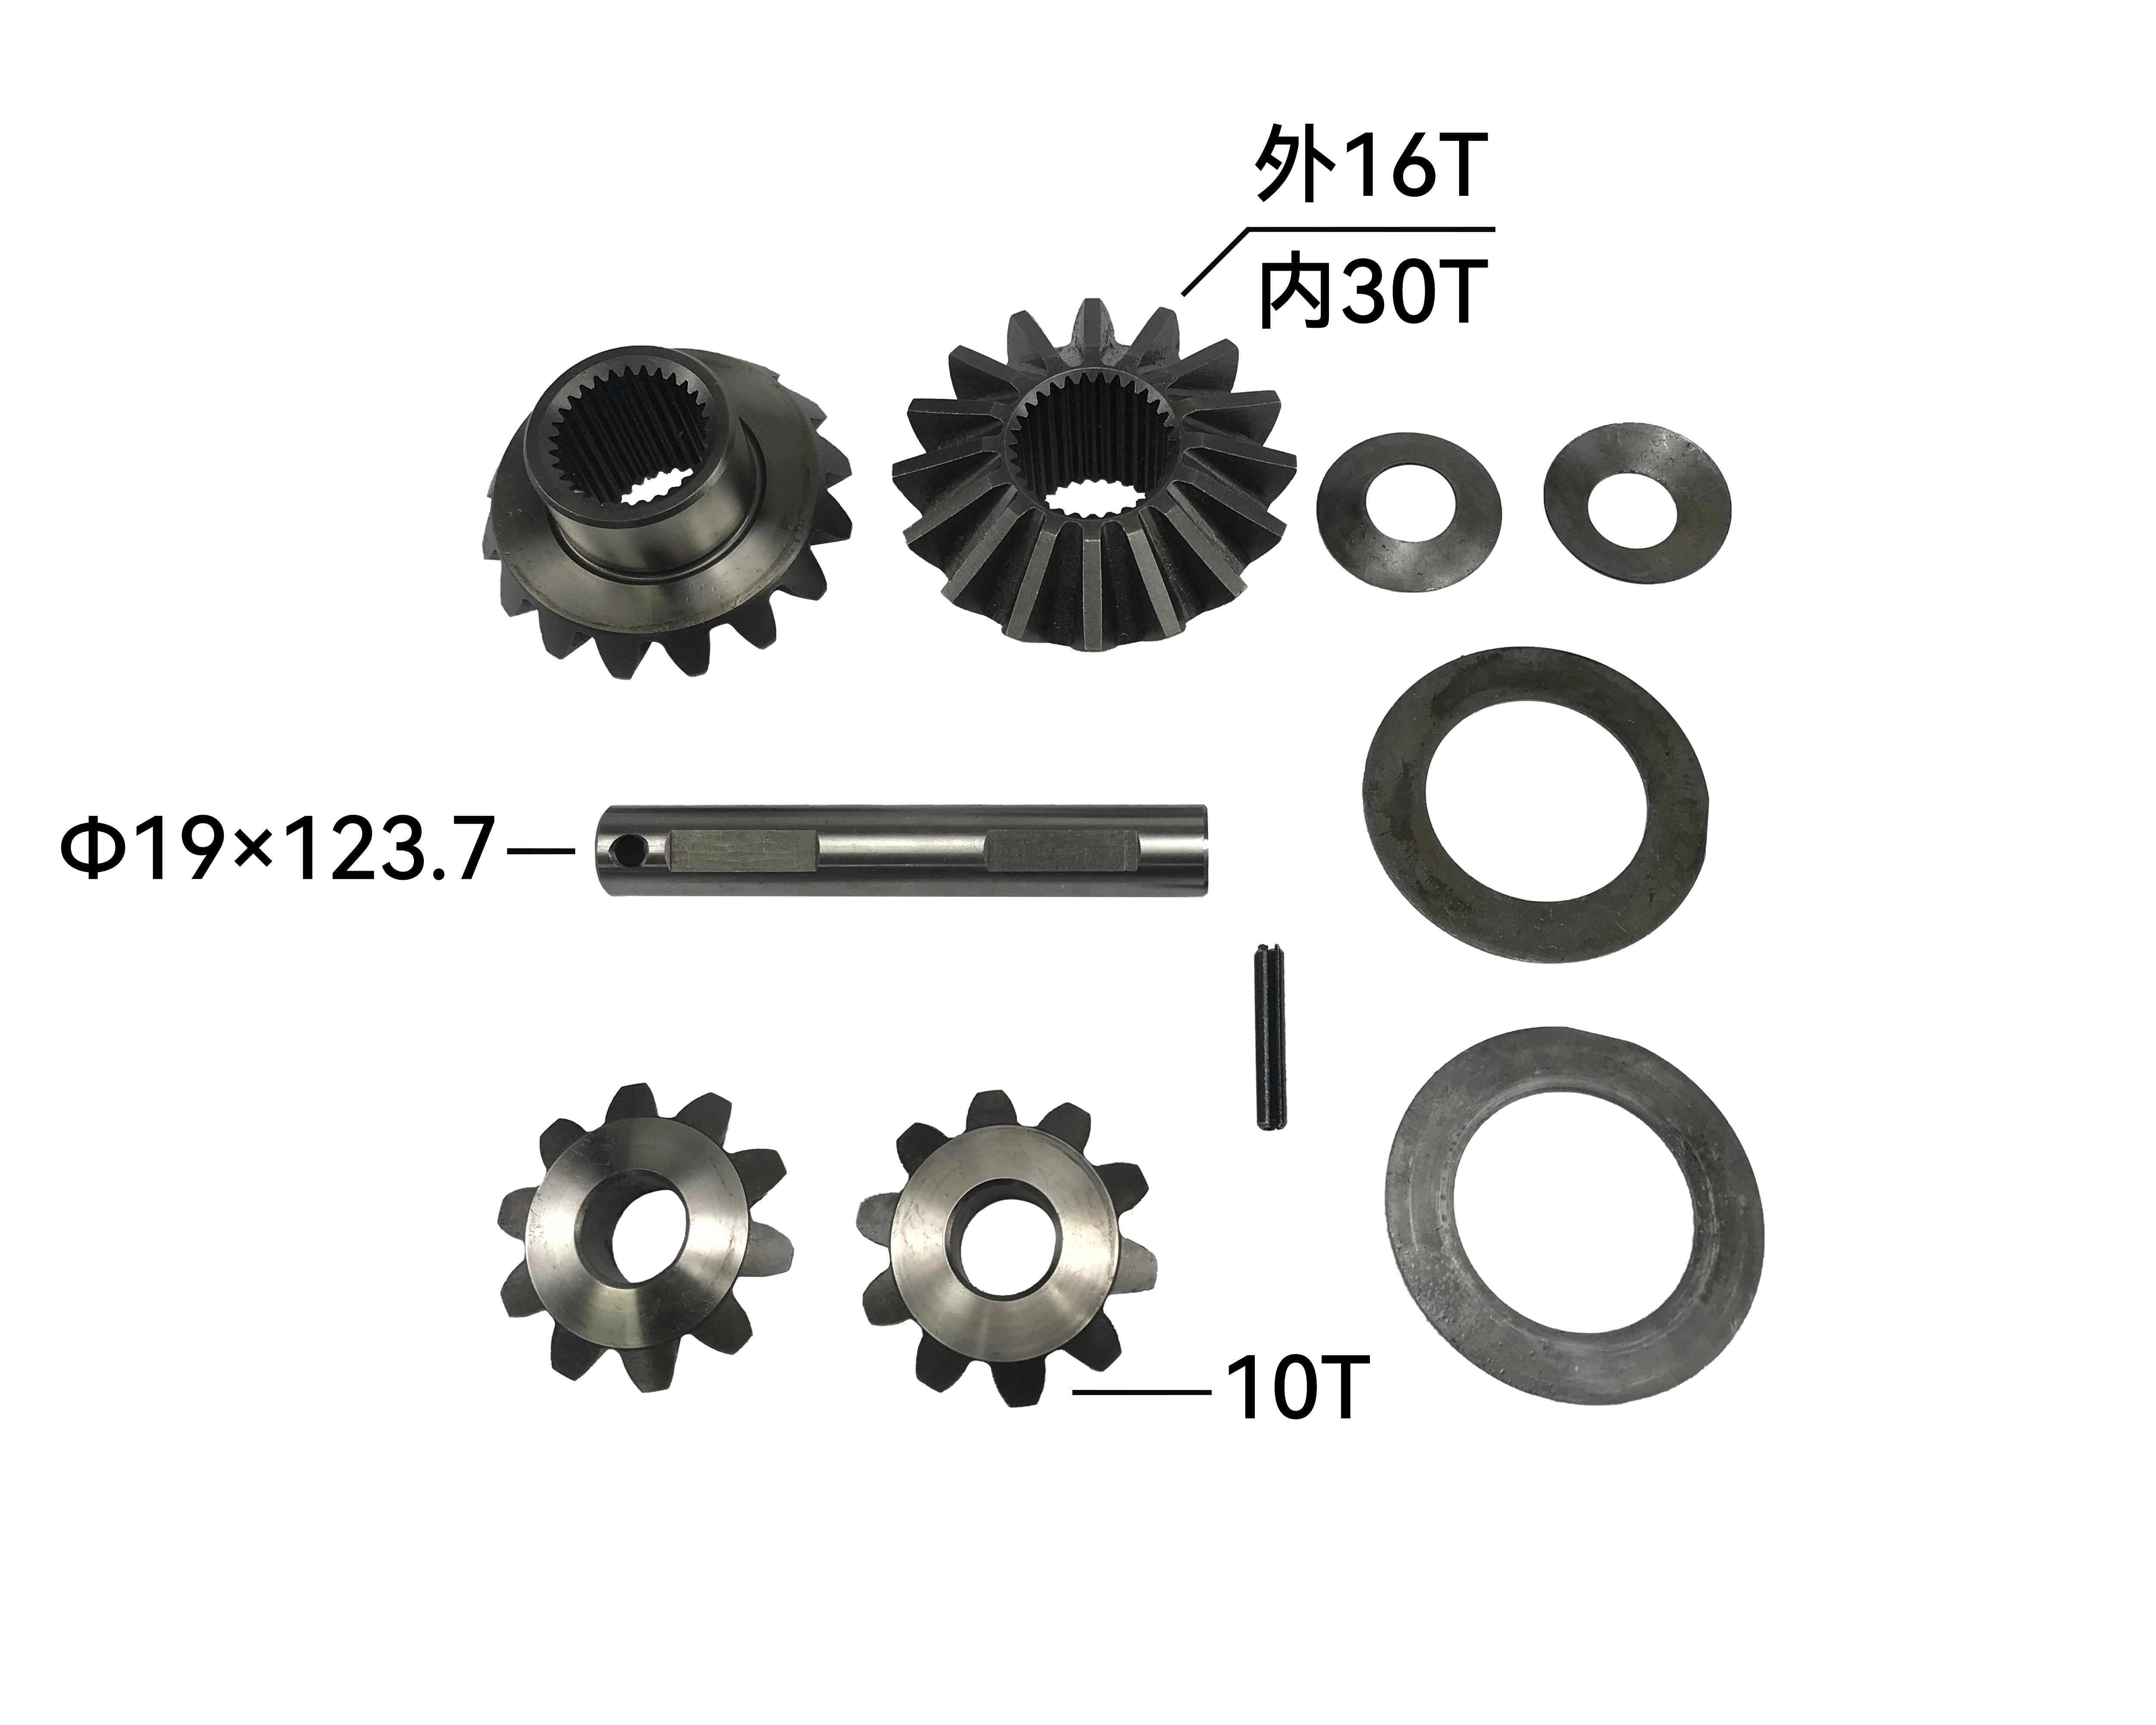 Spider Gear Kit Ford F-1000 Ford Ranger Ford F-250 GM A-20 C-20 D-20Mitsubishi L200 Trollery Size 19x123.7 16T/30T Weight:1.93 KG Kit Reparo Caixa Diferencial